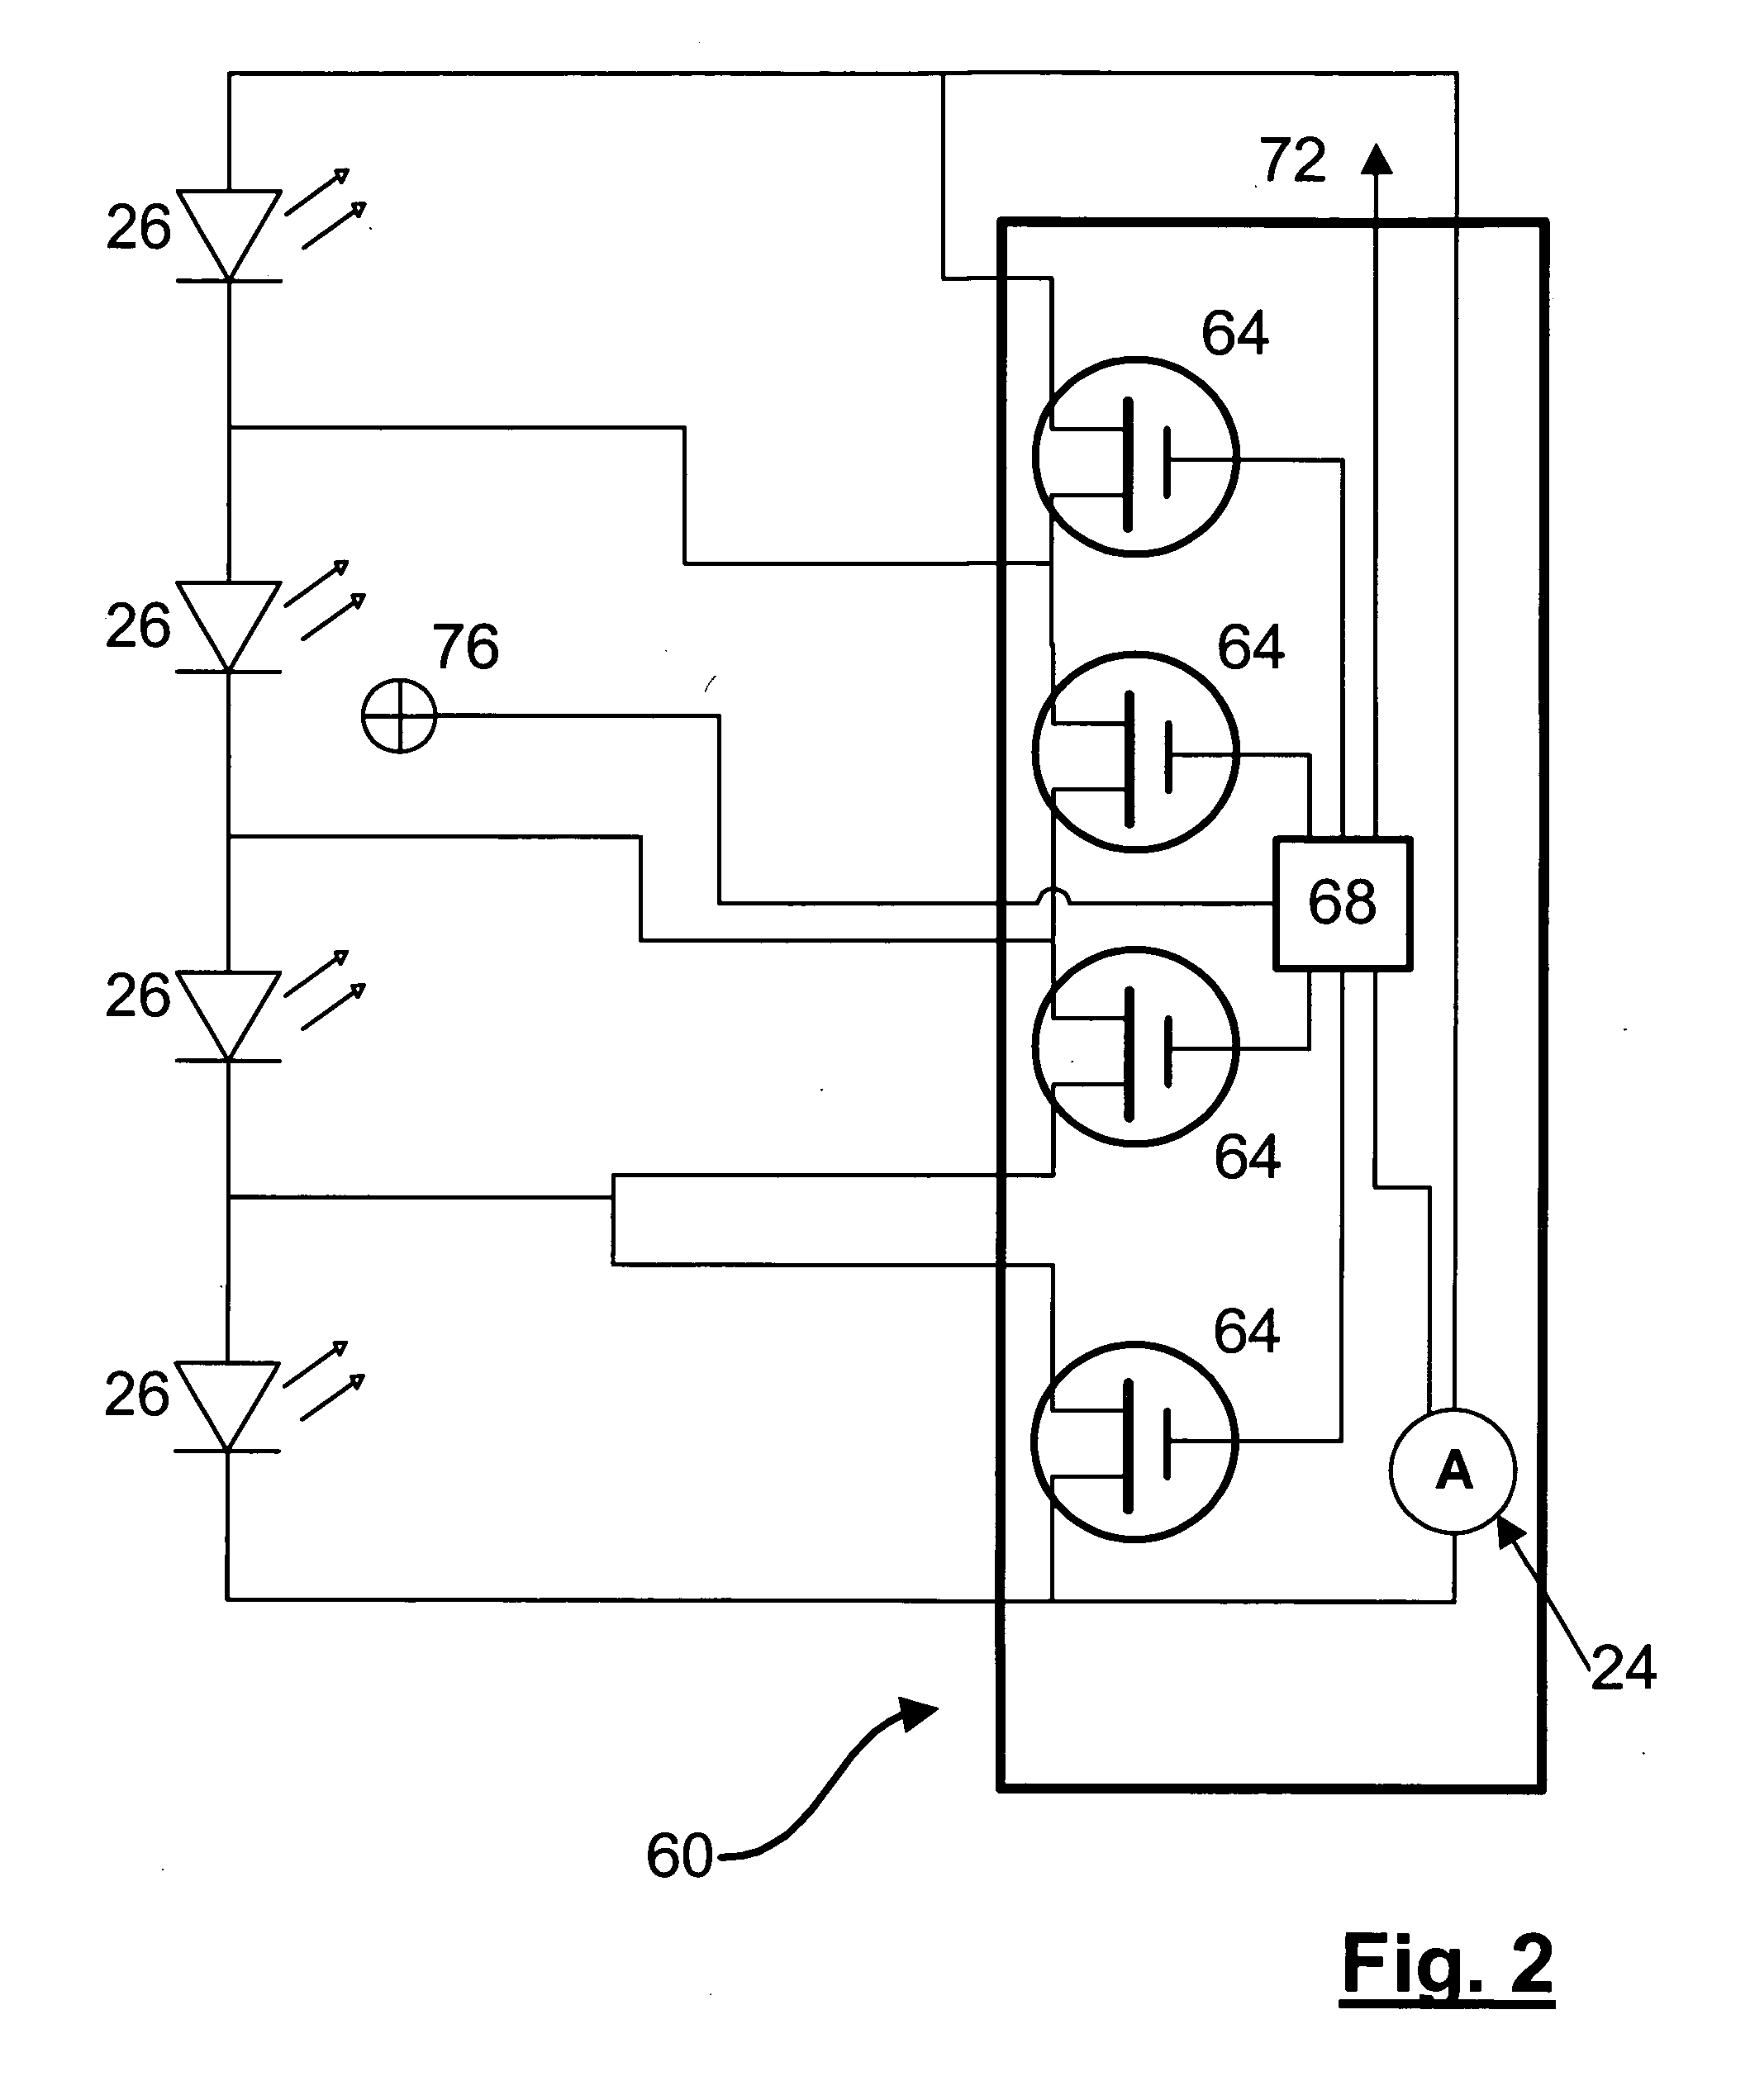 Series connected power supply for semiconductor-based vehicle lighting systems